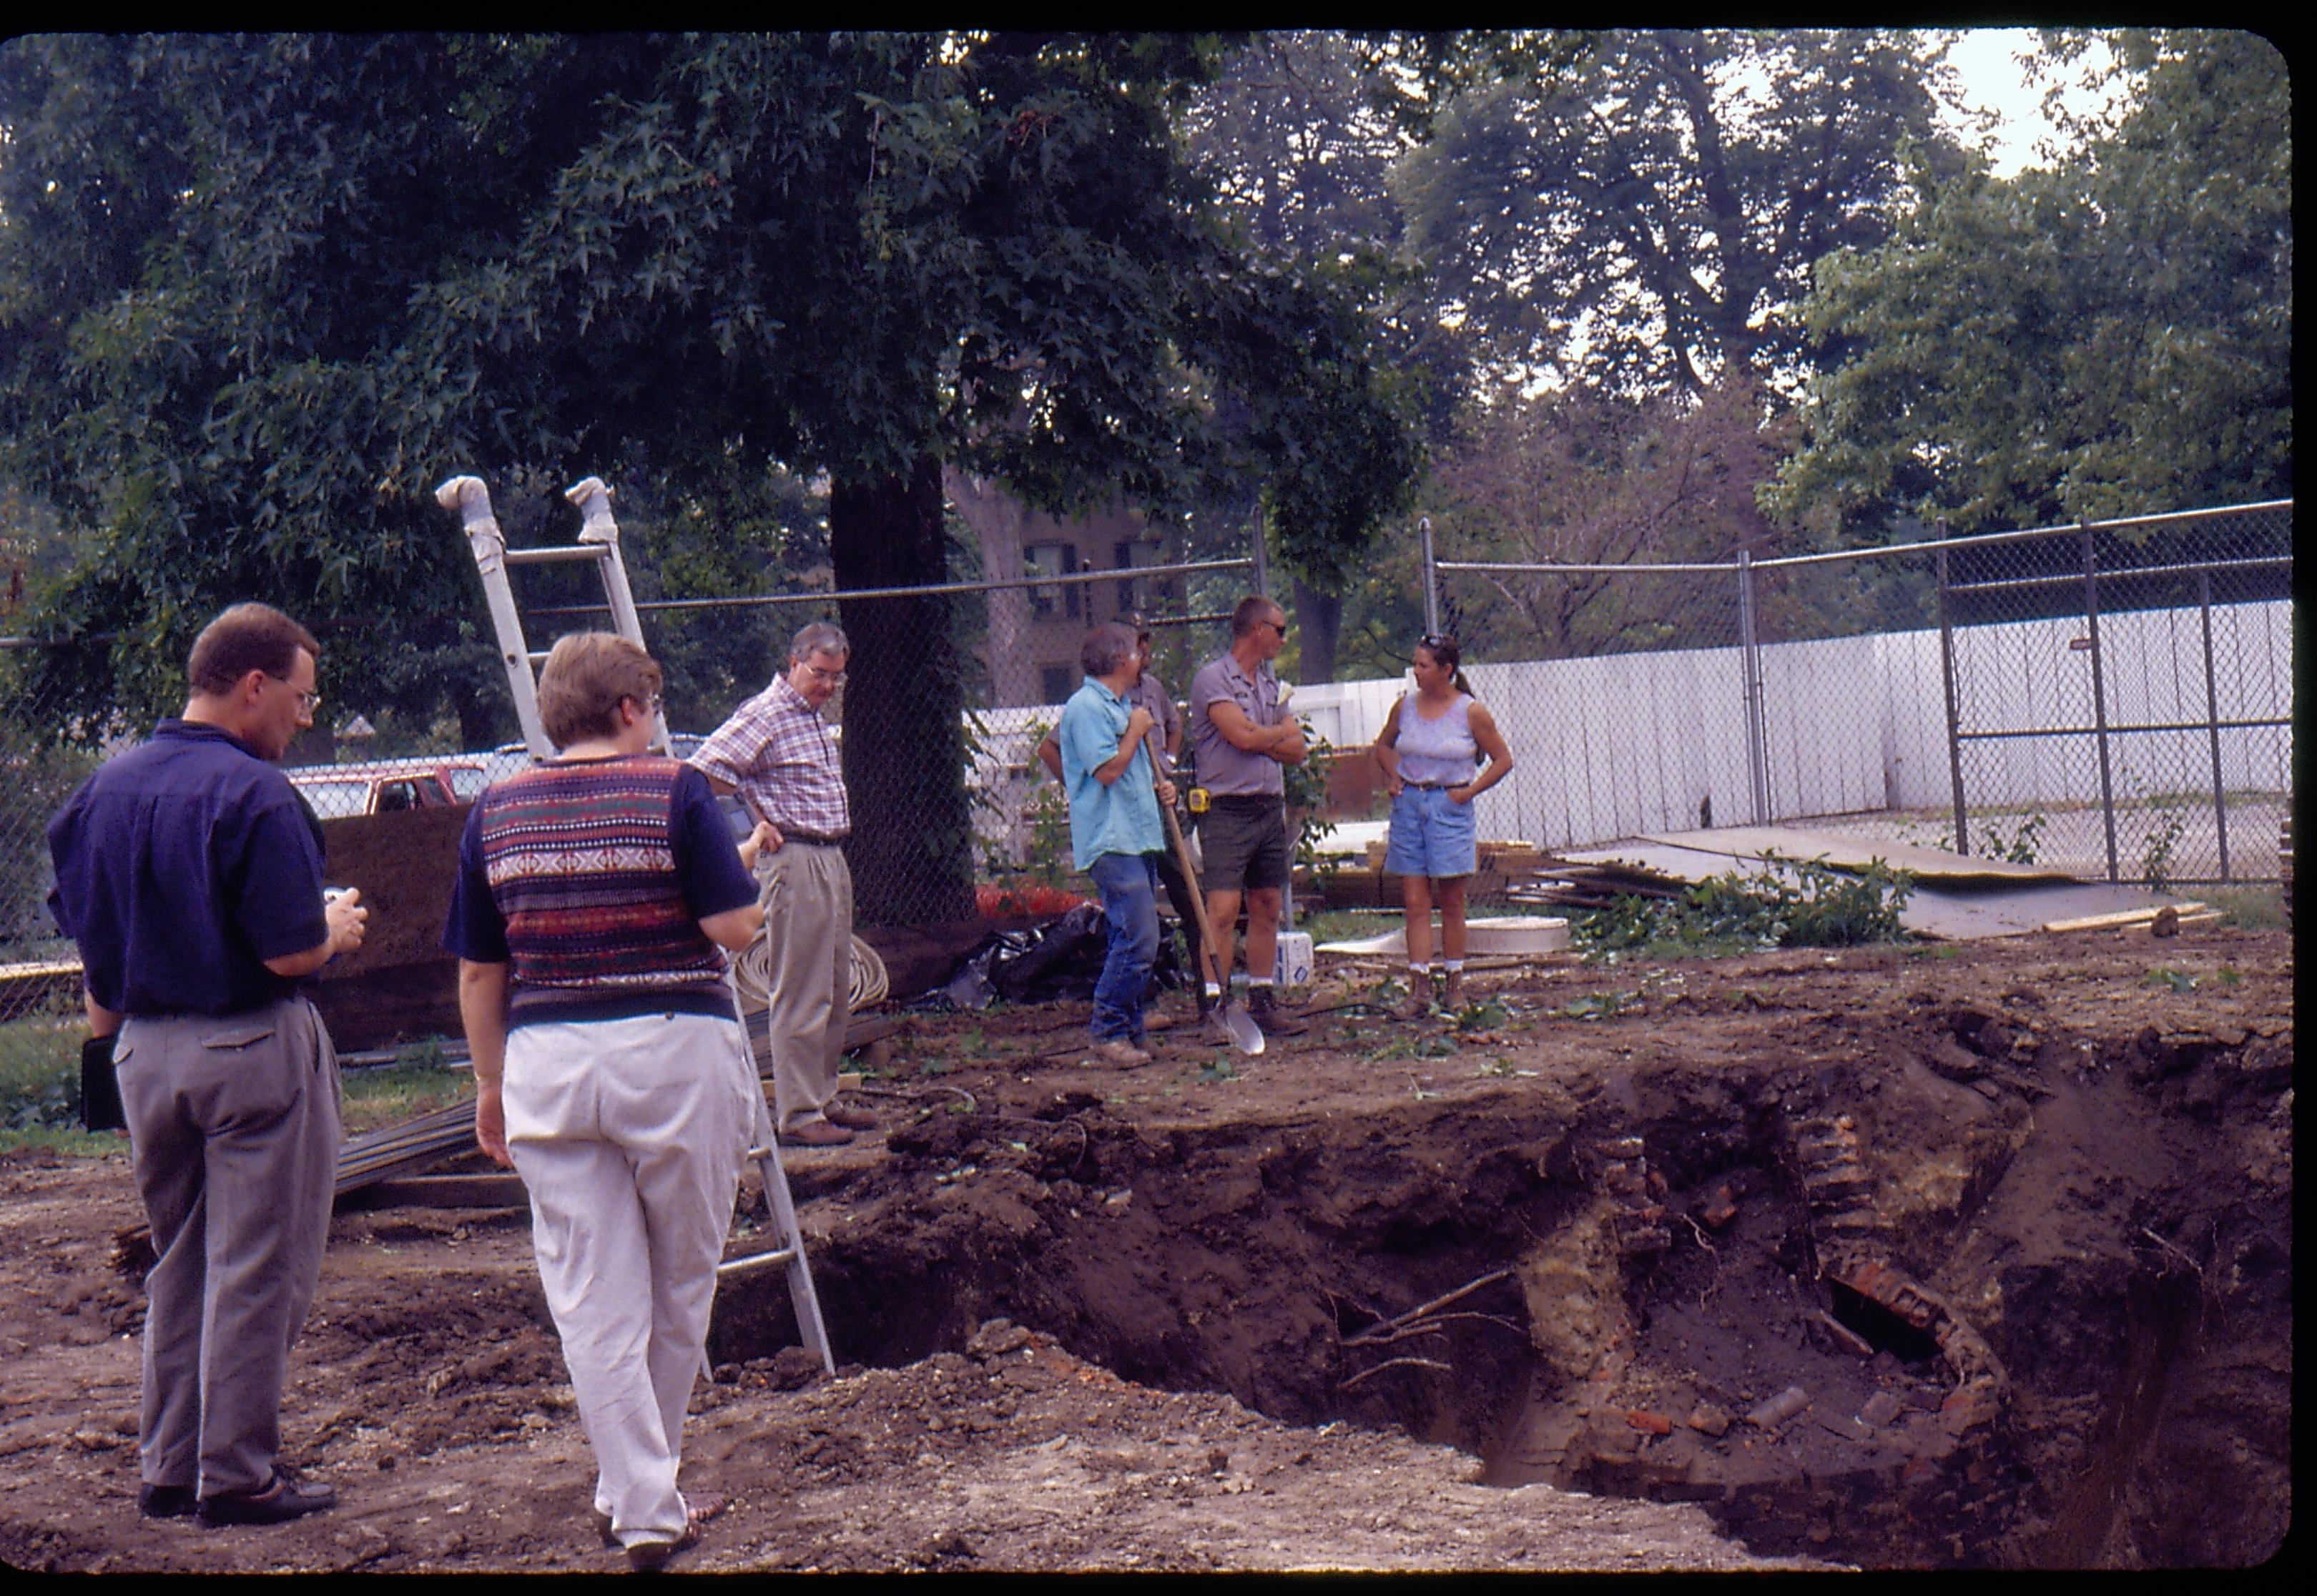 Morse - basement excavation. Historian Tim Townsend, Curator Susan Haake, Supt. Norman Hellmers, Maintenance Workers Ed Smith and Doug Sharp chat with contract archeology staff from Fever River. Archeologist Floyd Mansberger with shovel. Brick cistern in on right. Lincoln Home in background right Looking Southwest from Morse Lot (Block 10, Lots 15-16) Morse, foundation, archeology, cistern, Lincoln Home,staff, Fever River